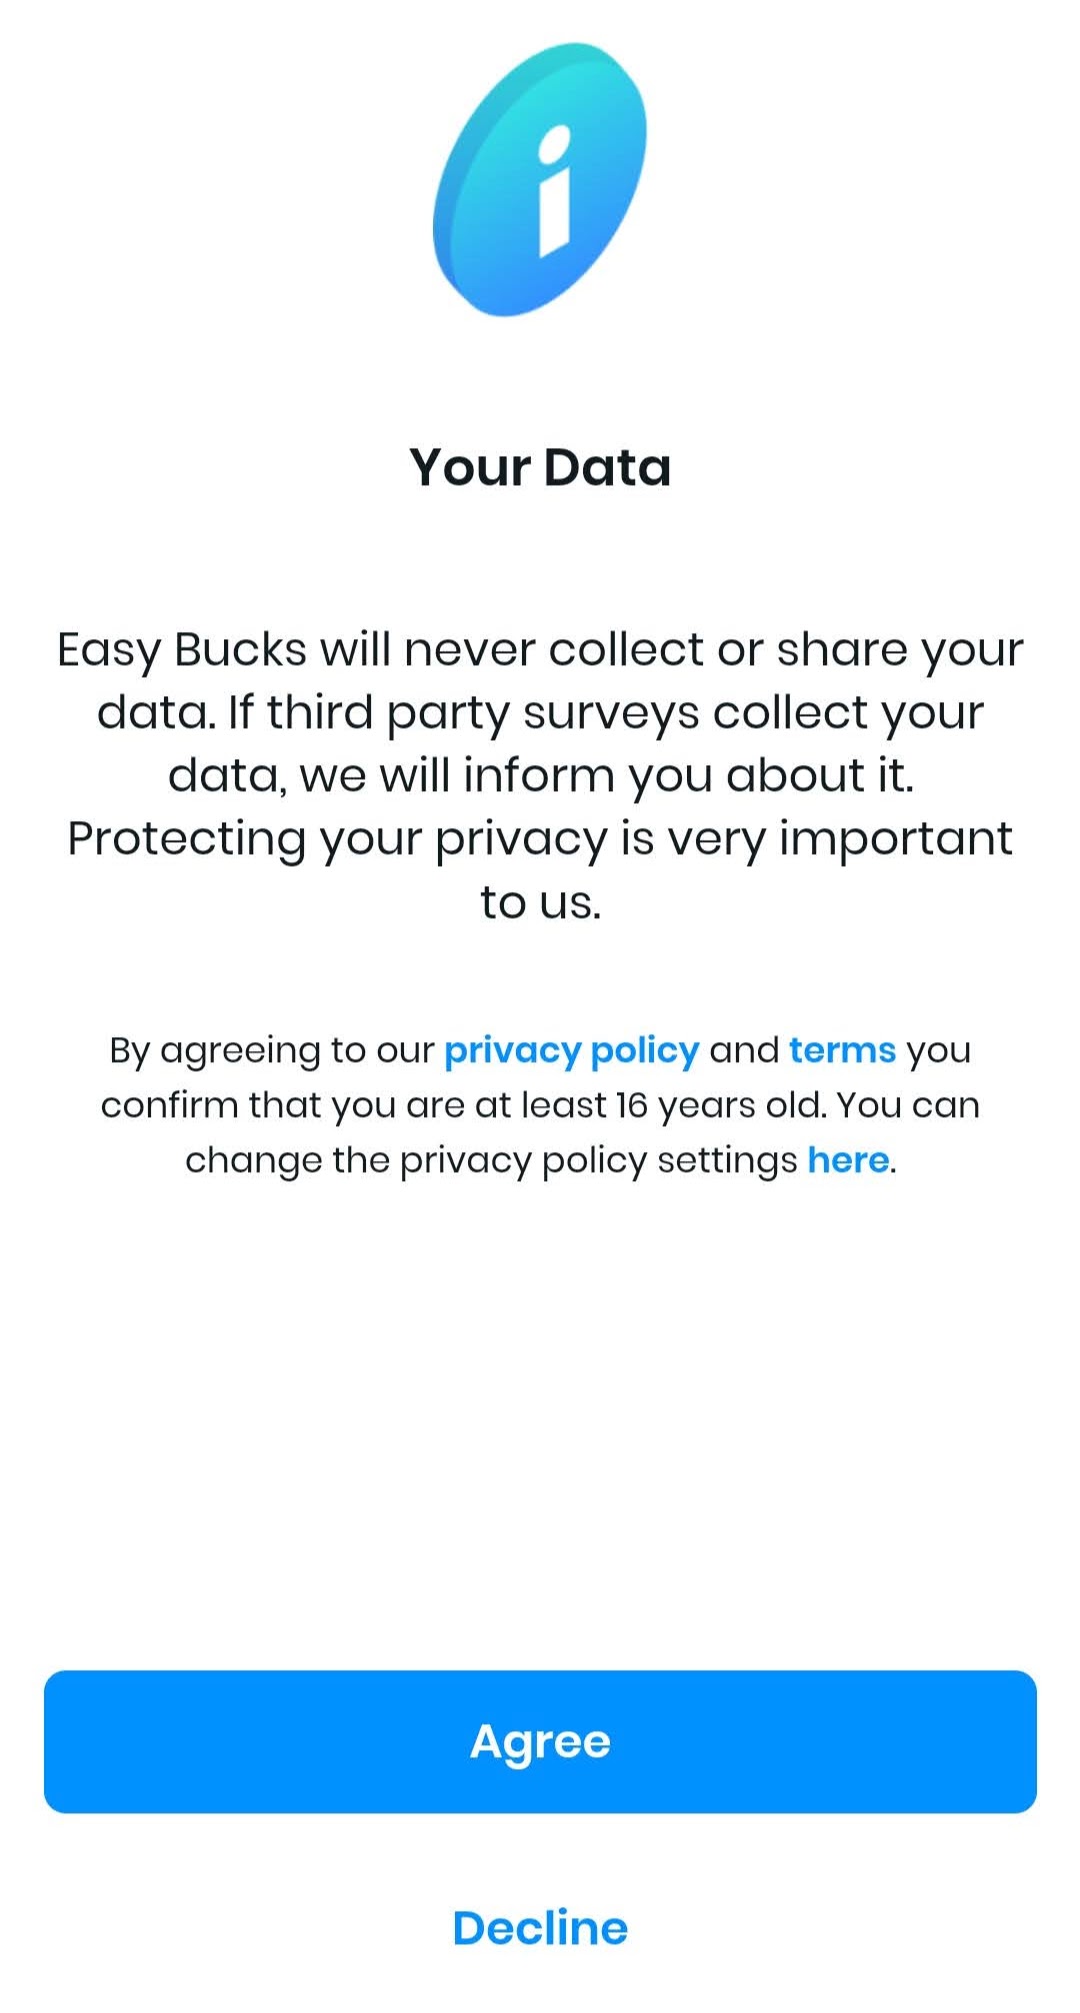 Easy Bucks privacy policy protection